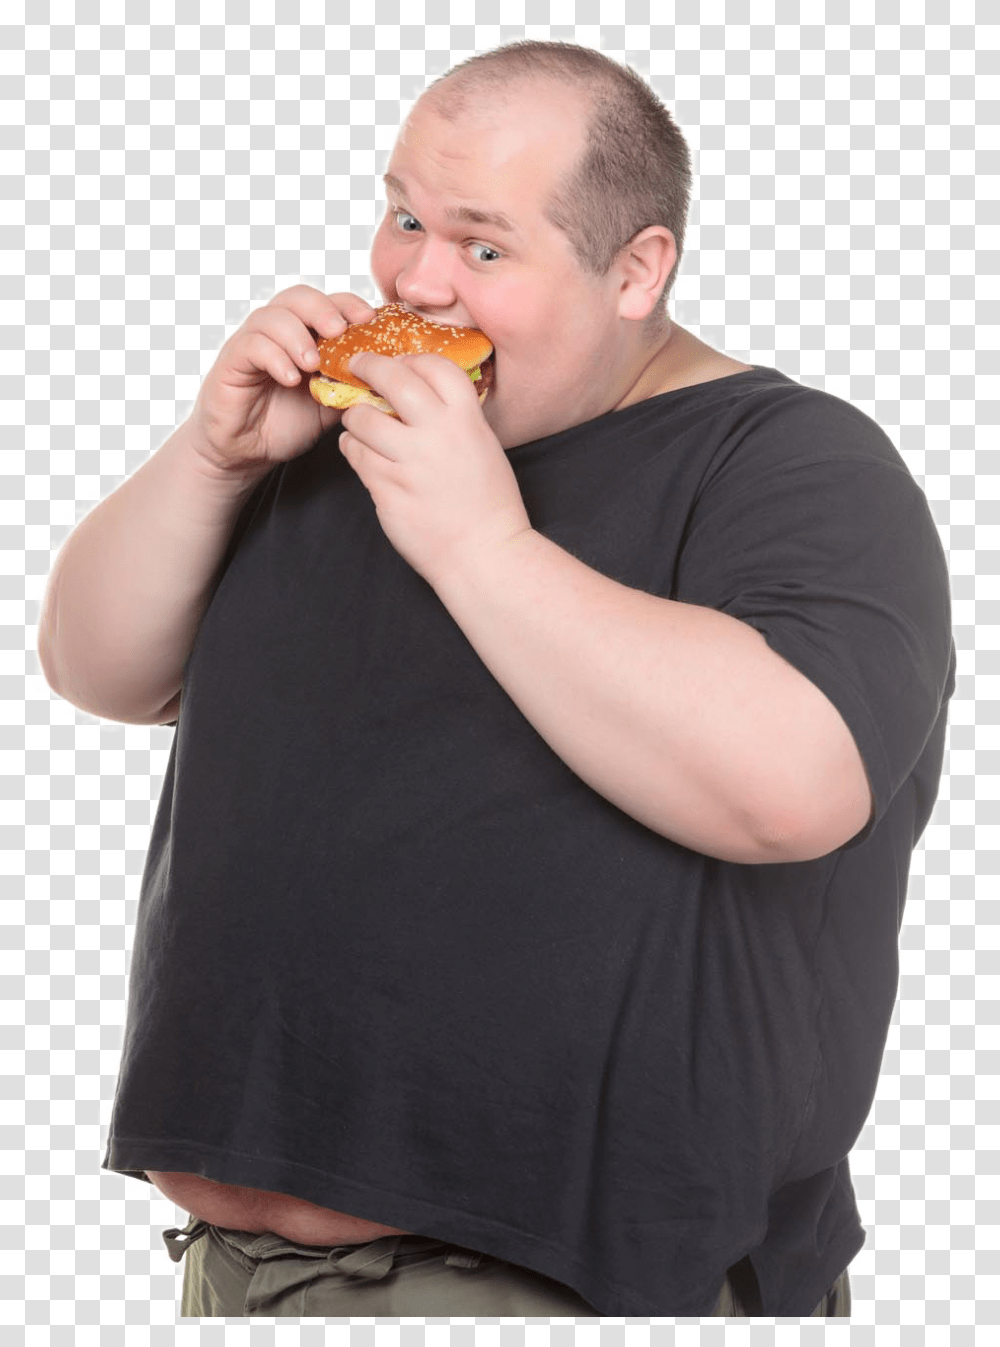 Clip Art A Transprent Free Fat Guy Eating, Person, Human, Food, Hot Dog Transparent Png